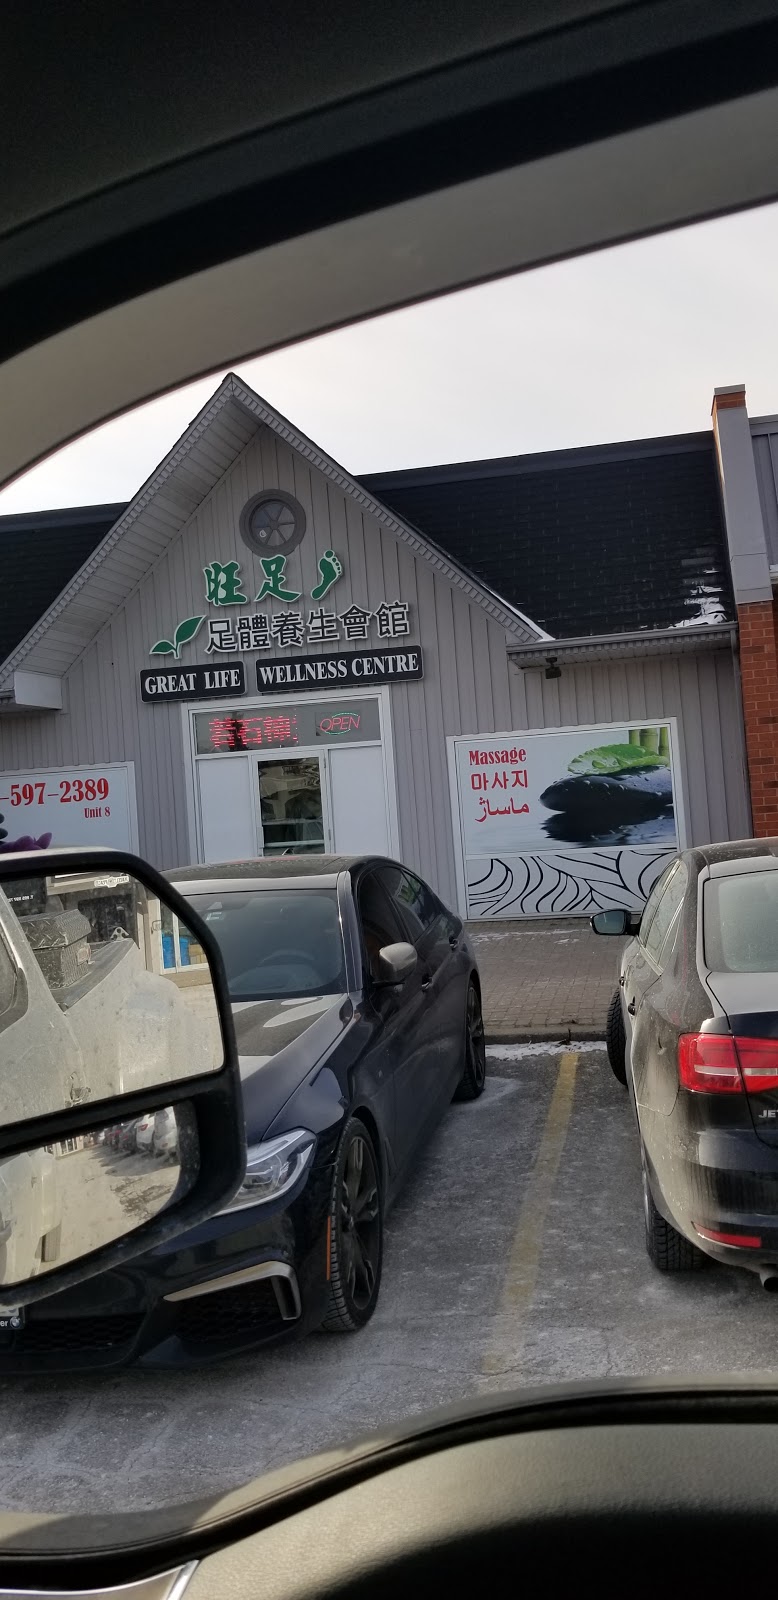 Great Life Wellness Centre 旺足 | Thornhill, ON L4J 7Y1, Canada | Phone: (905) 597-2389